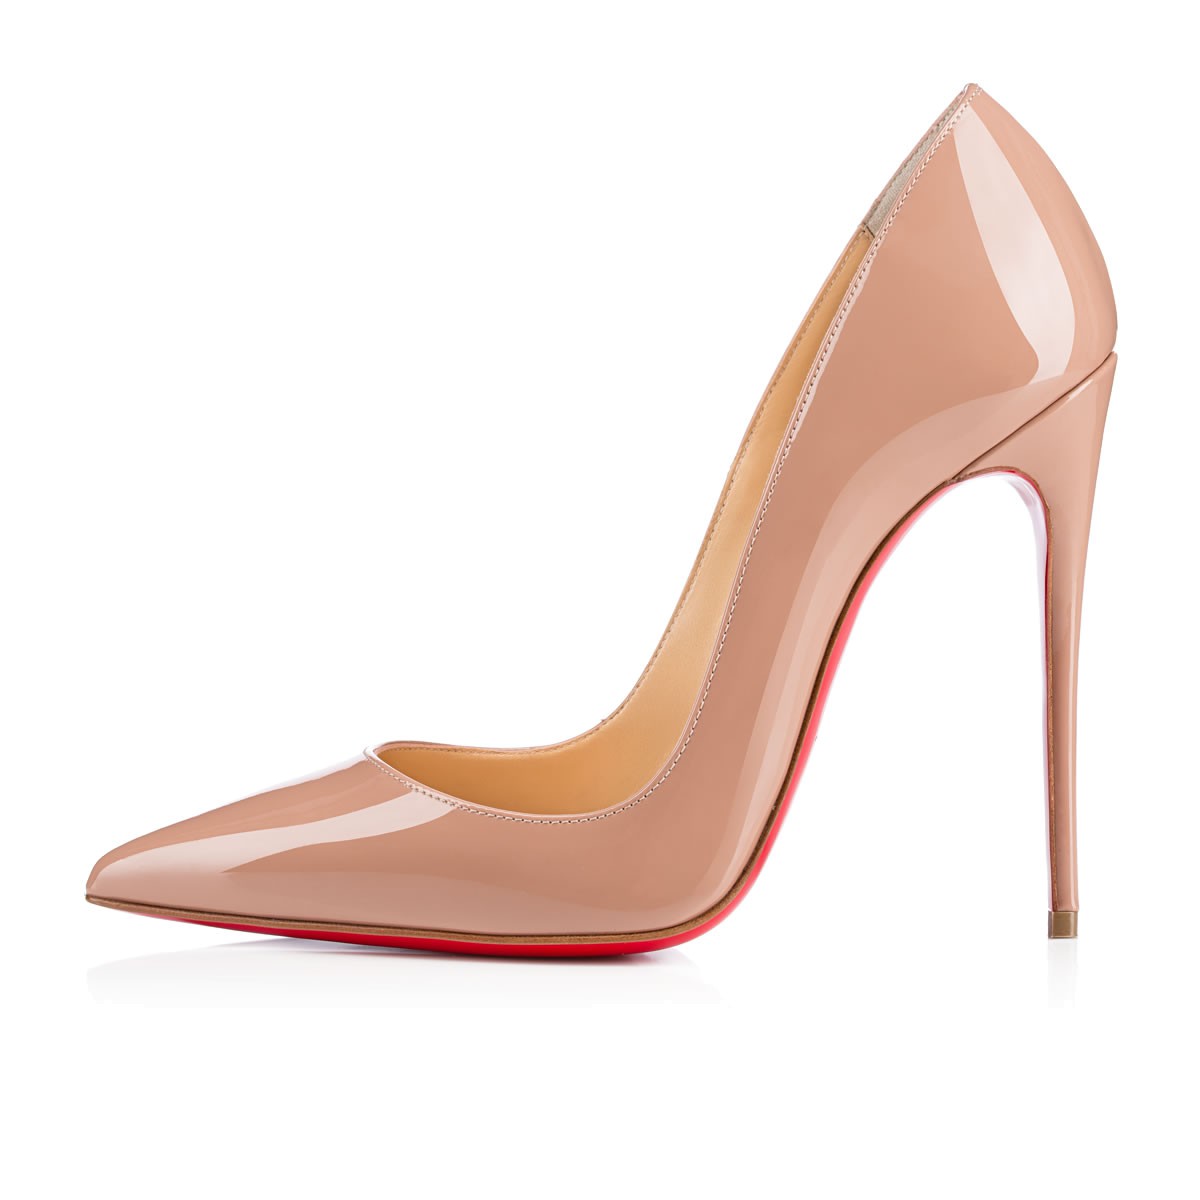 chaussures louboutin beige femme